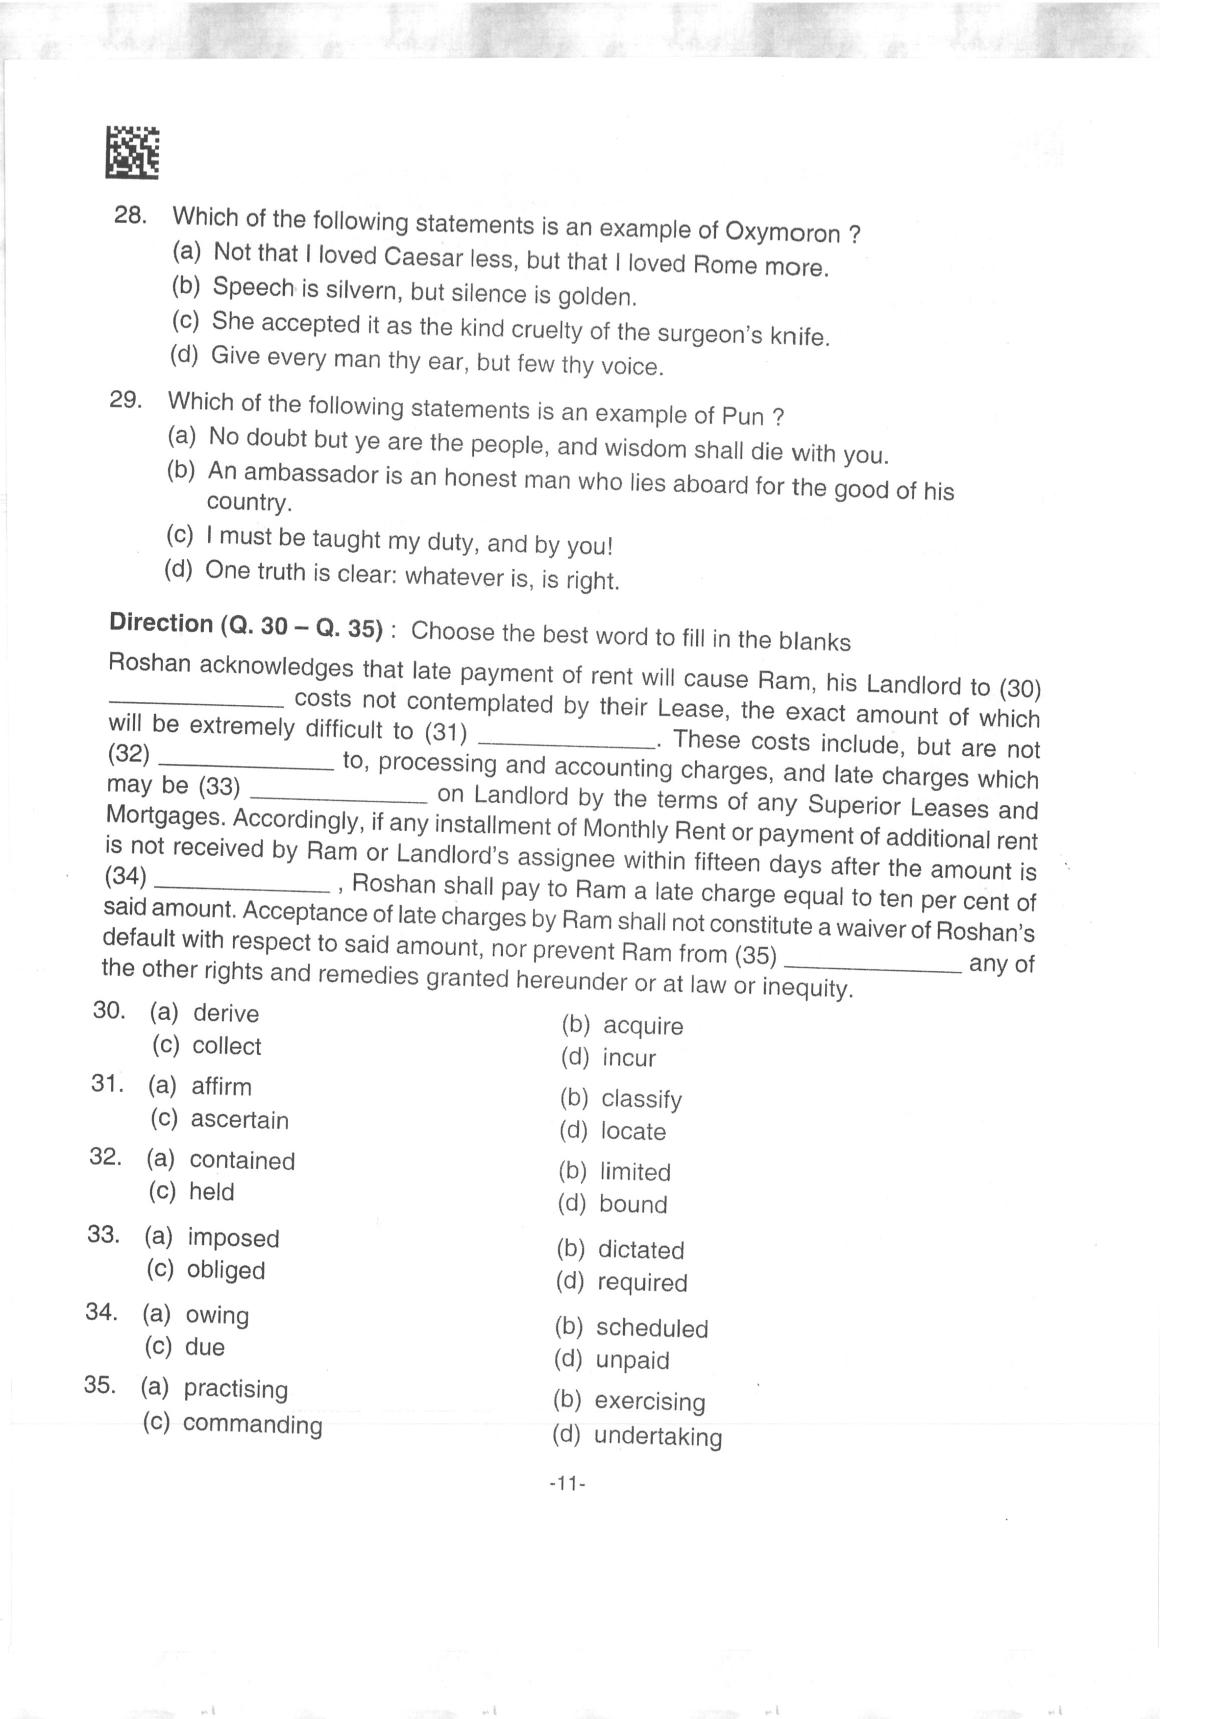 AILET 2019 Question Paper for BA LLB - Page 11